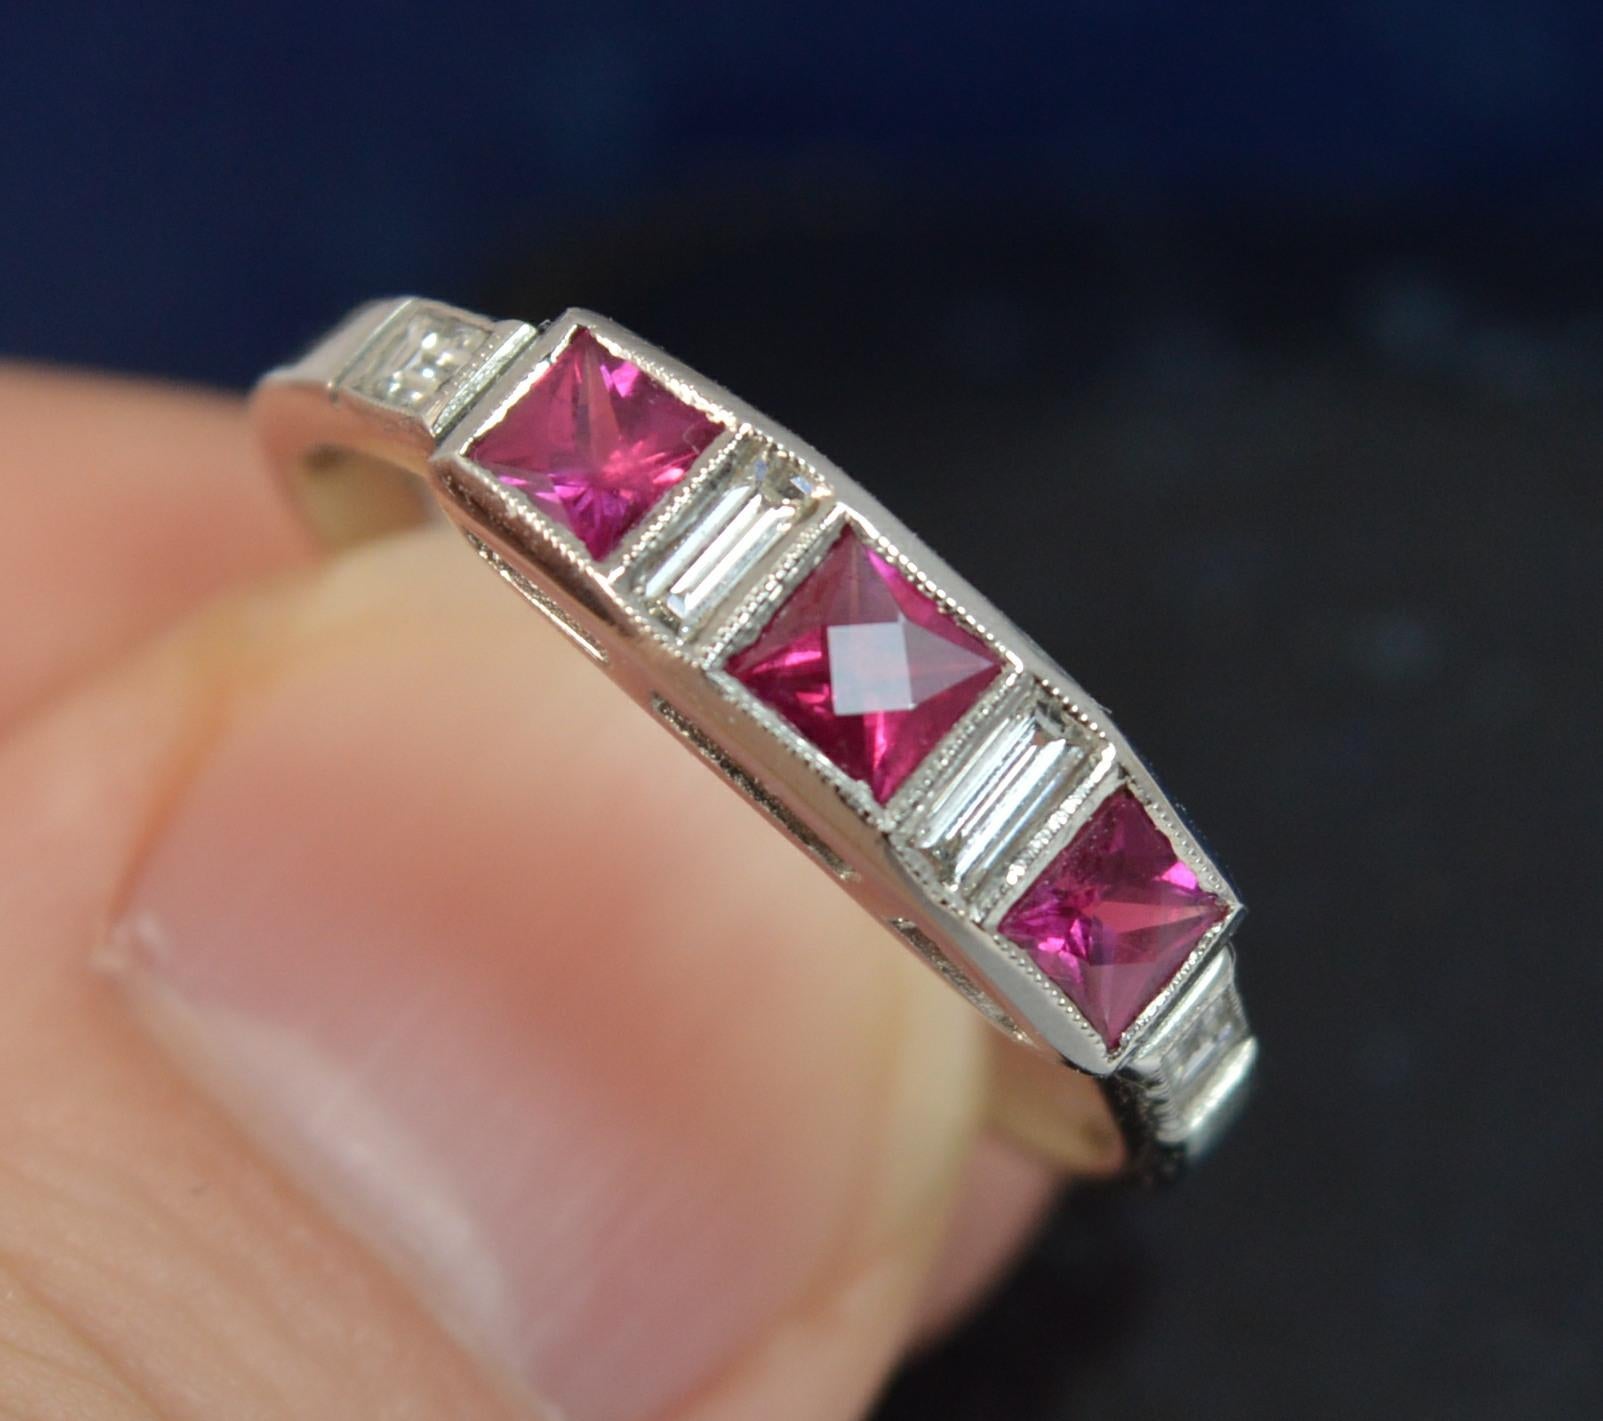 A stunning Art Deco design Ruby and Diamond ring.
Ring Size; N 1/2 UK, 7 US
Modelled in 950 grade solid platinum.

Designed with three French cut rubies of vivid bright pink red stones with a baguette cut diamond in between and a further diamond to